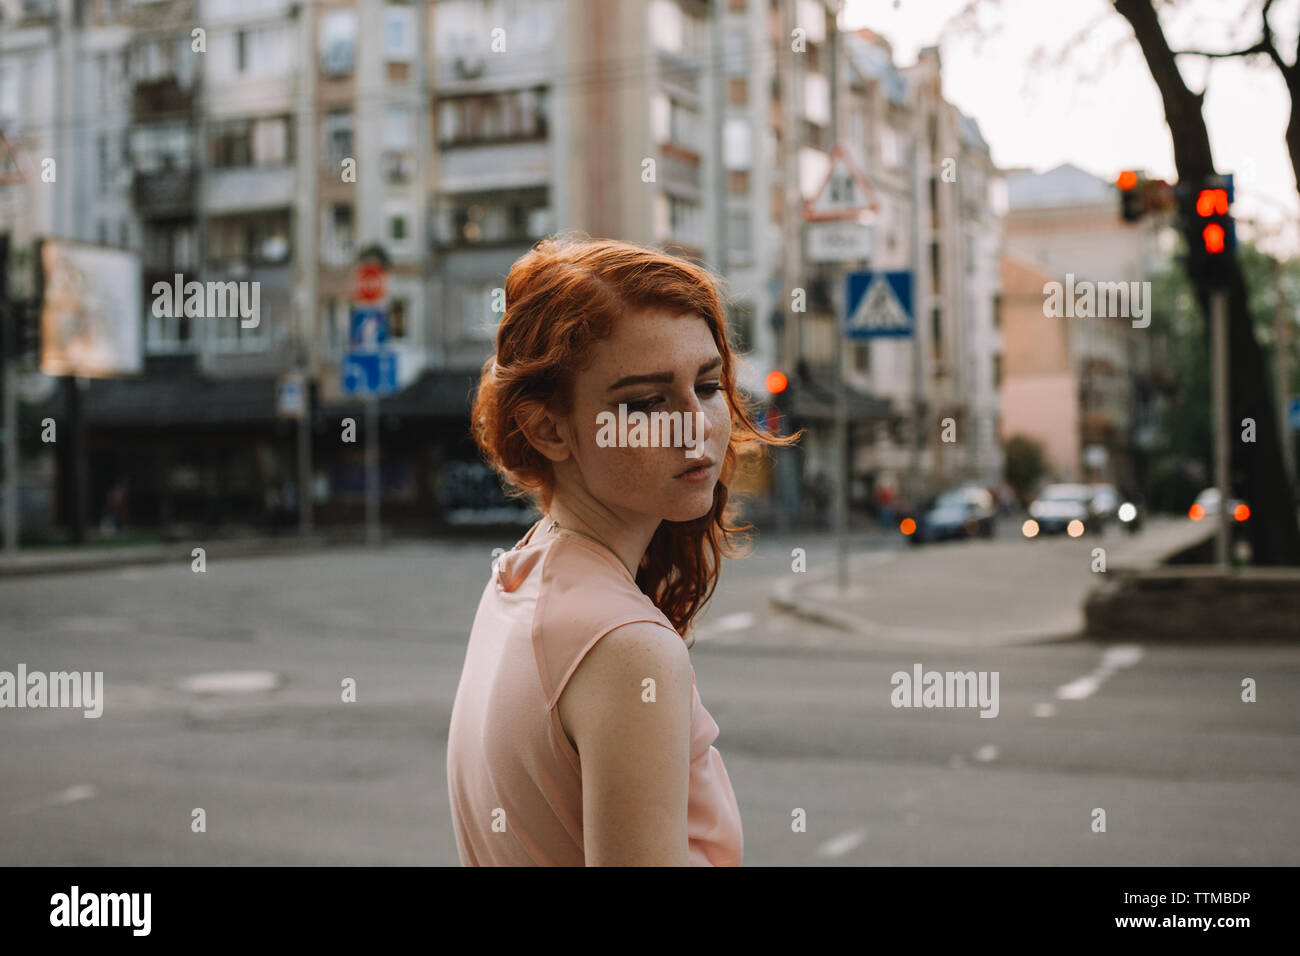 Portrait of young sad woman with freckles standing in city street Stock Photo